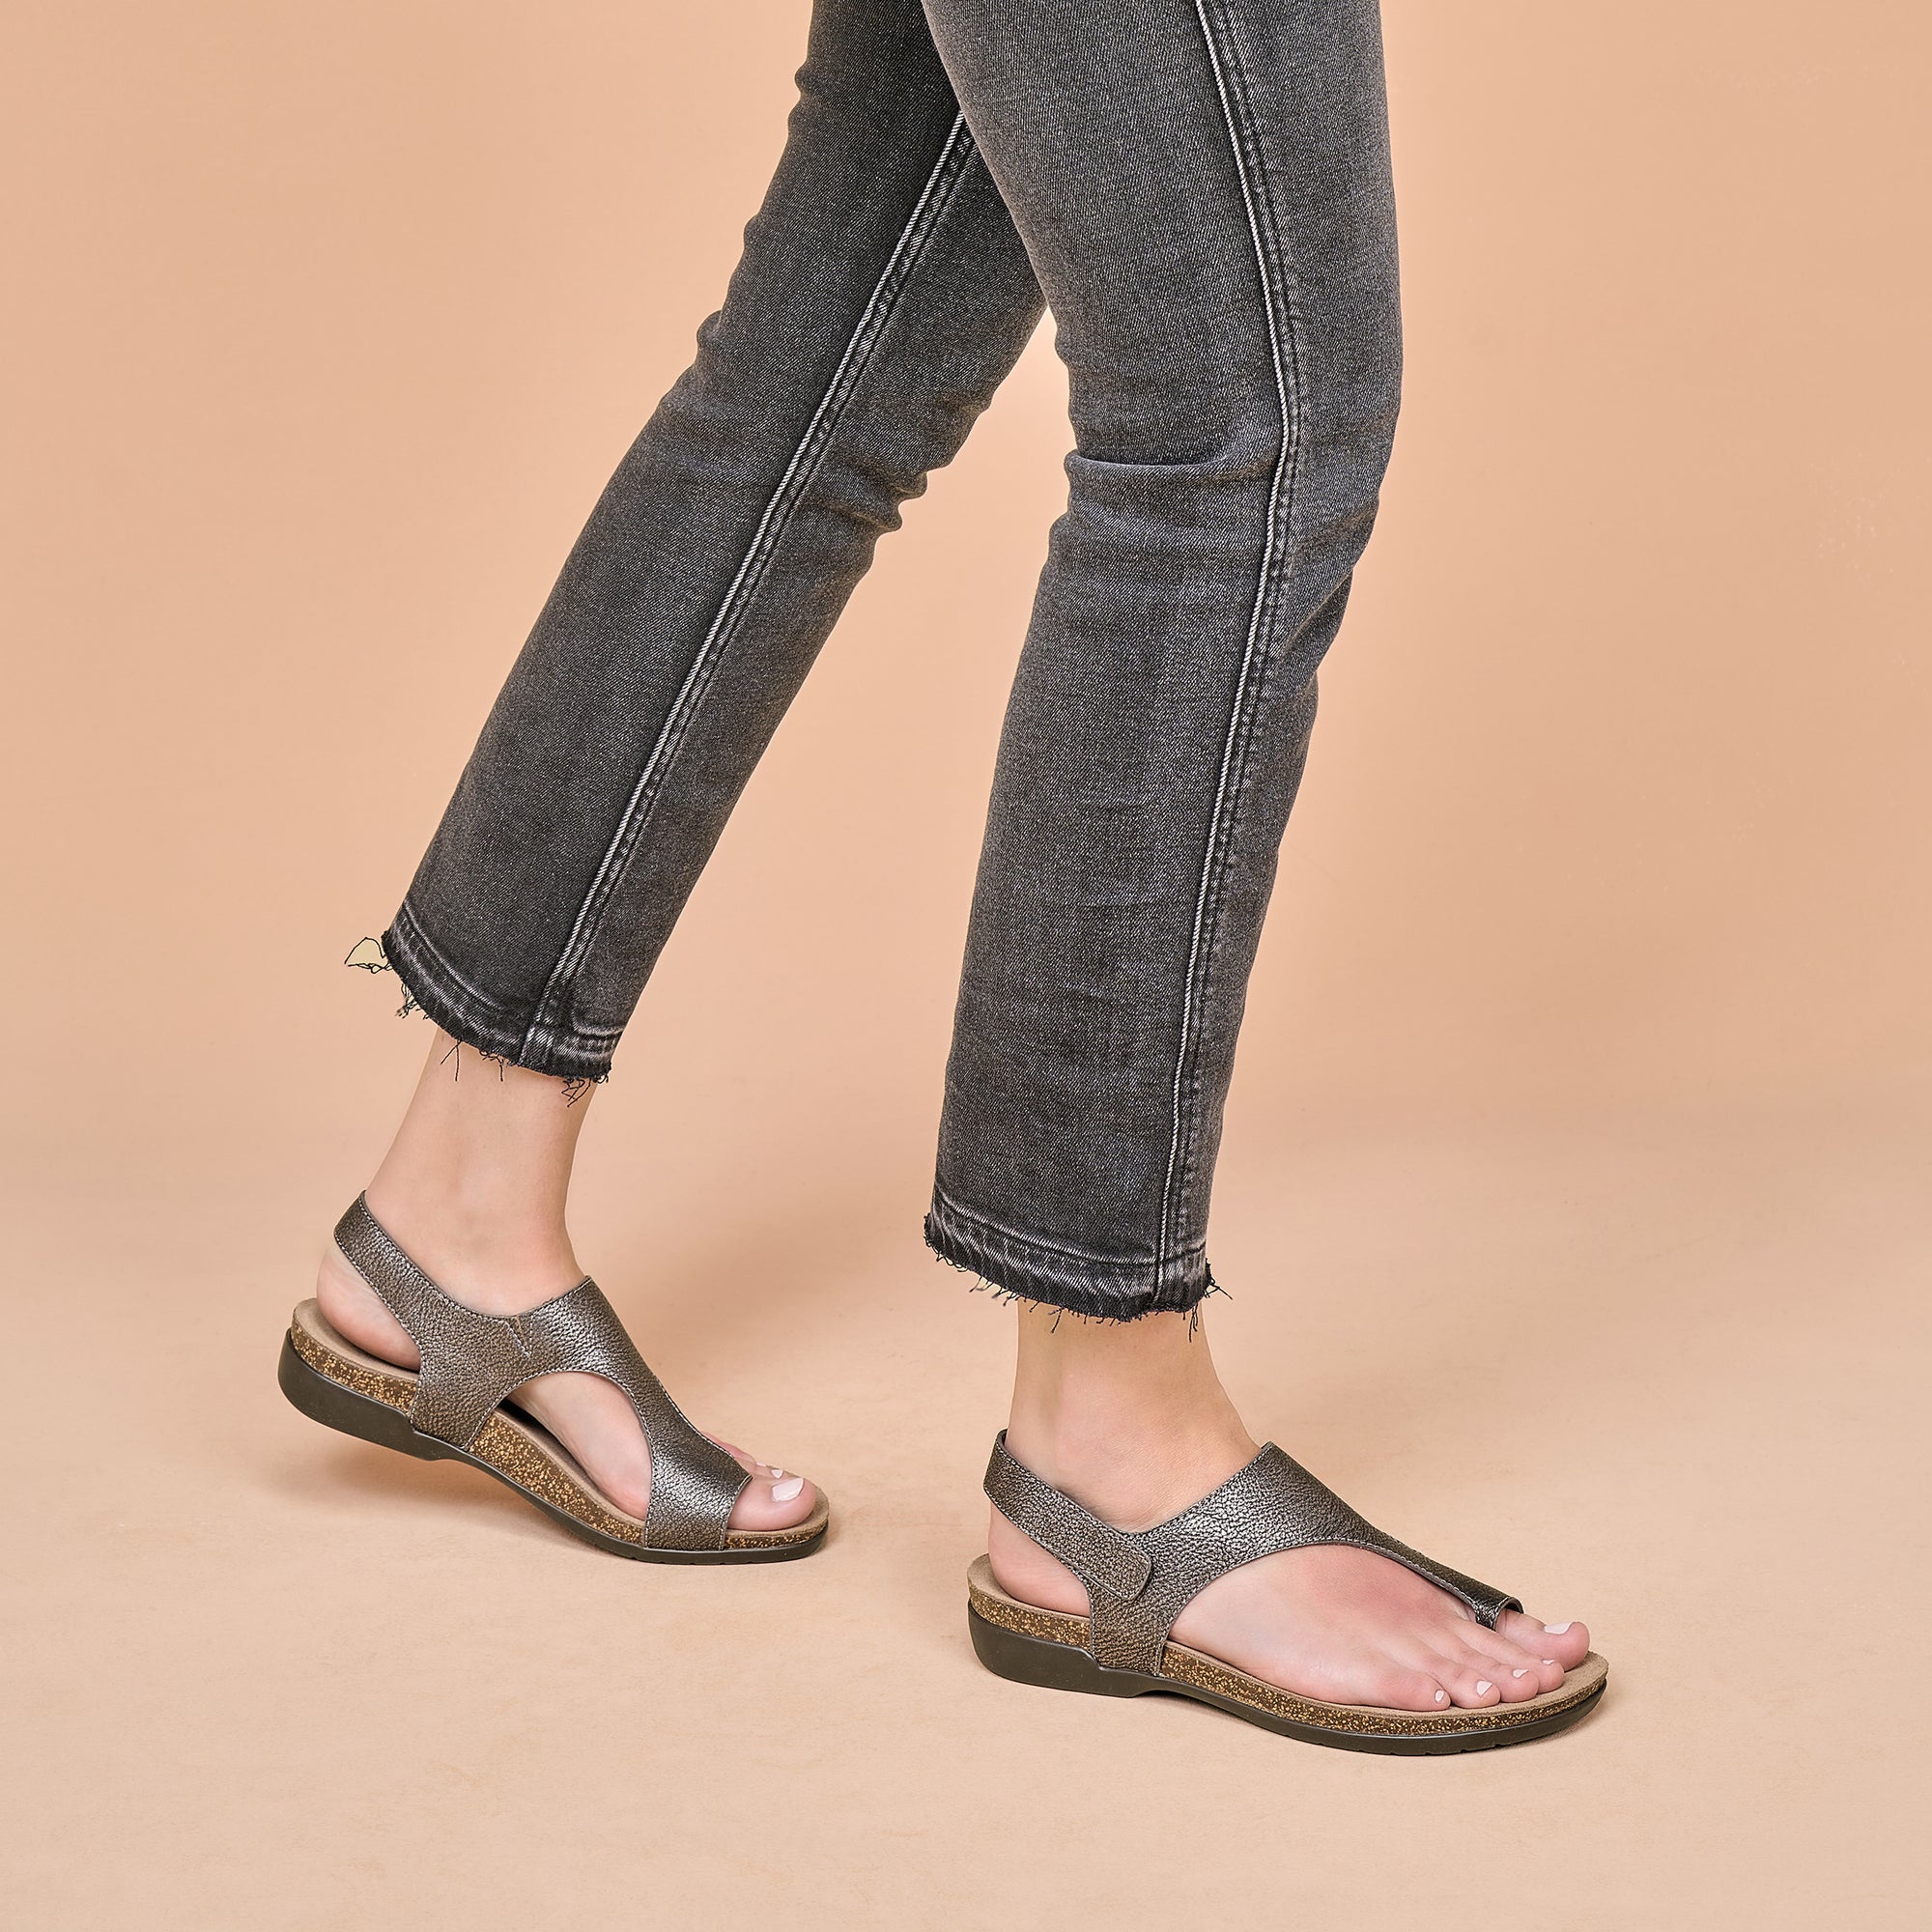 A closeup of metallic leather sandals worn with black jeans.